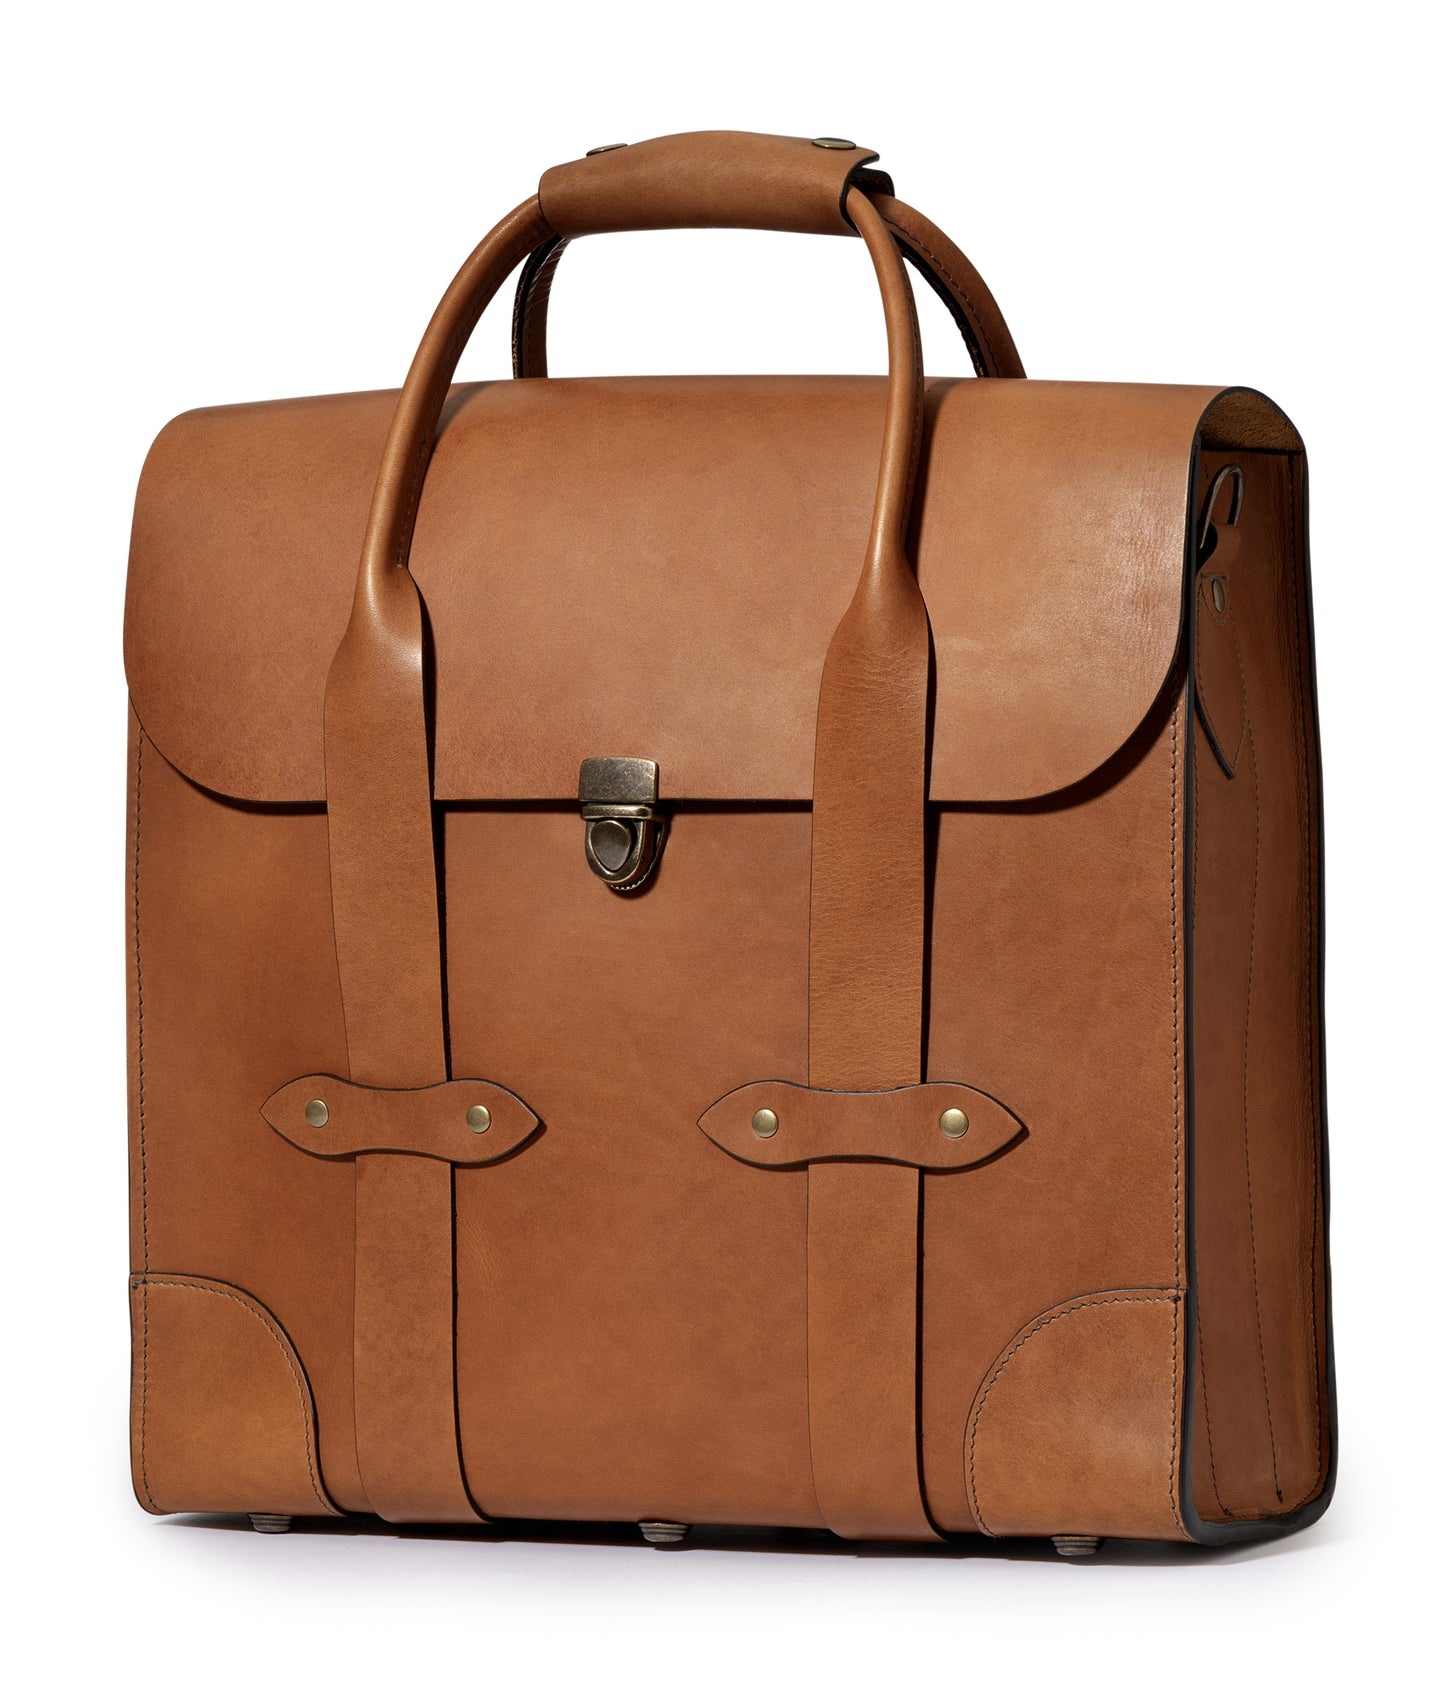 full grain leather bourbon bag in saddle tan leather front angle